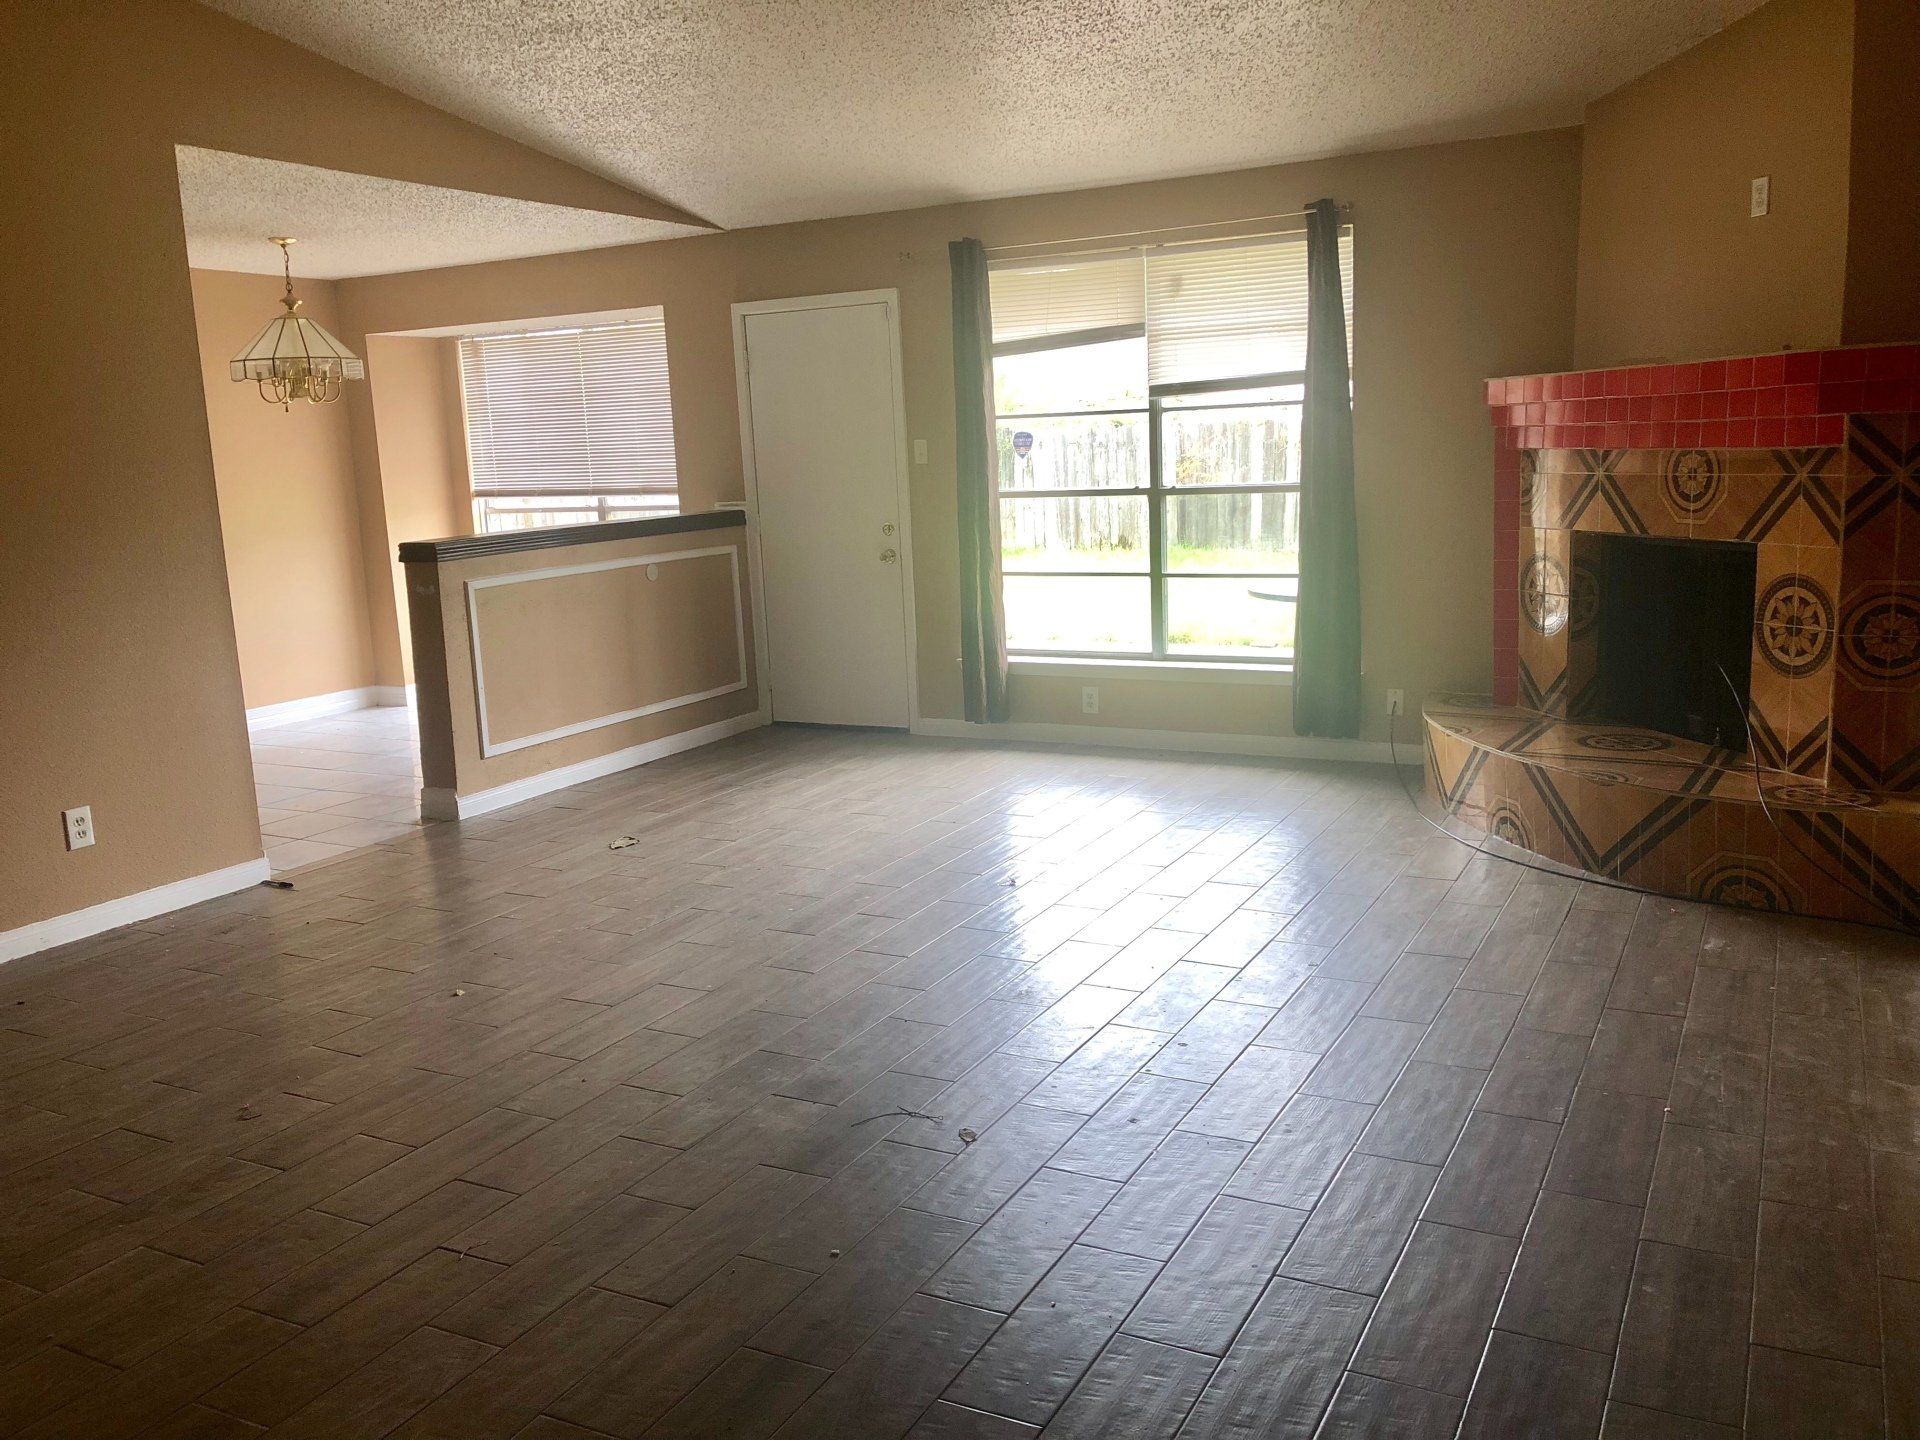 Rent ready Home in Fort Bend Houston